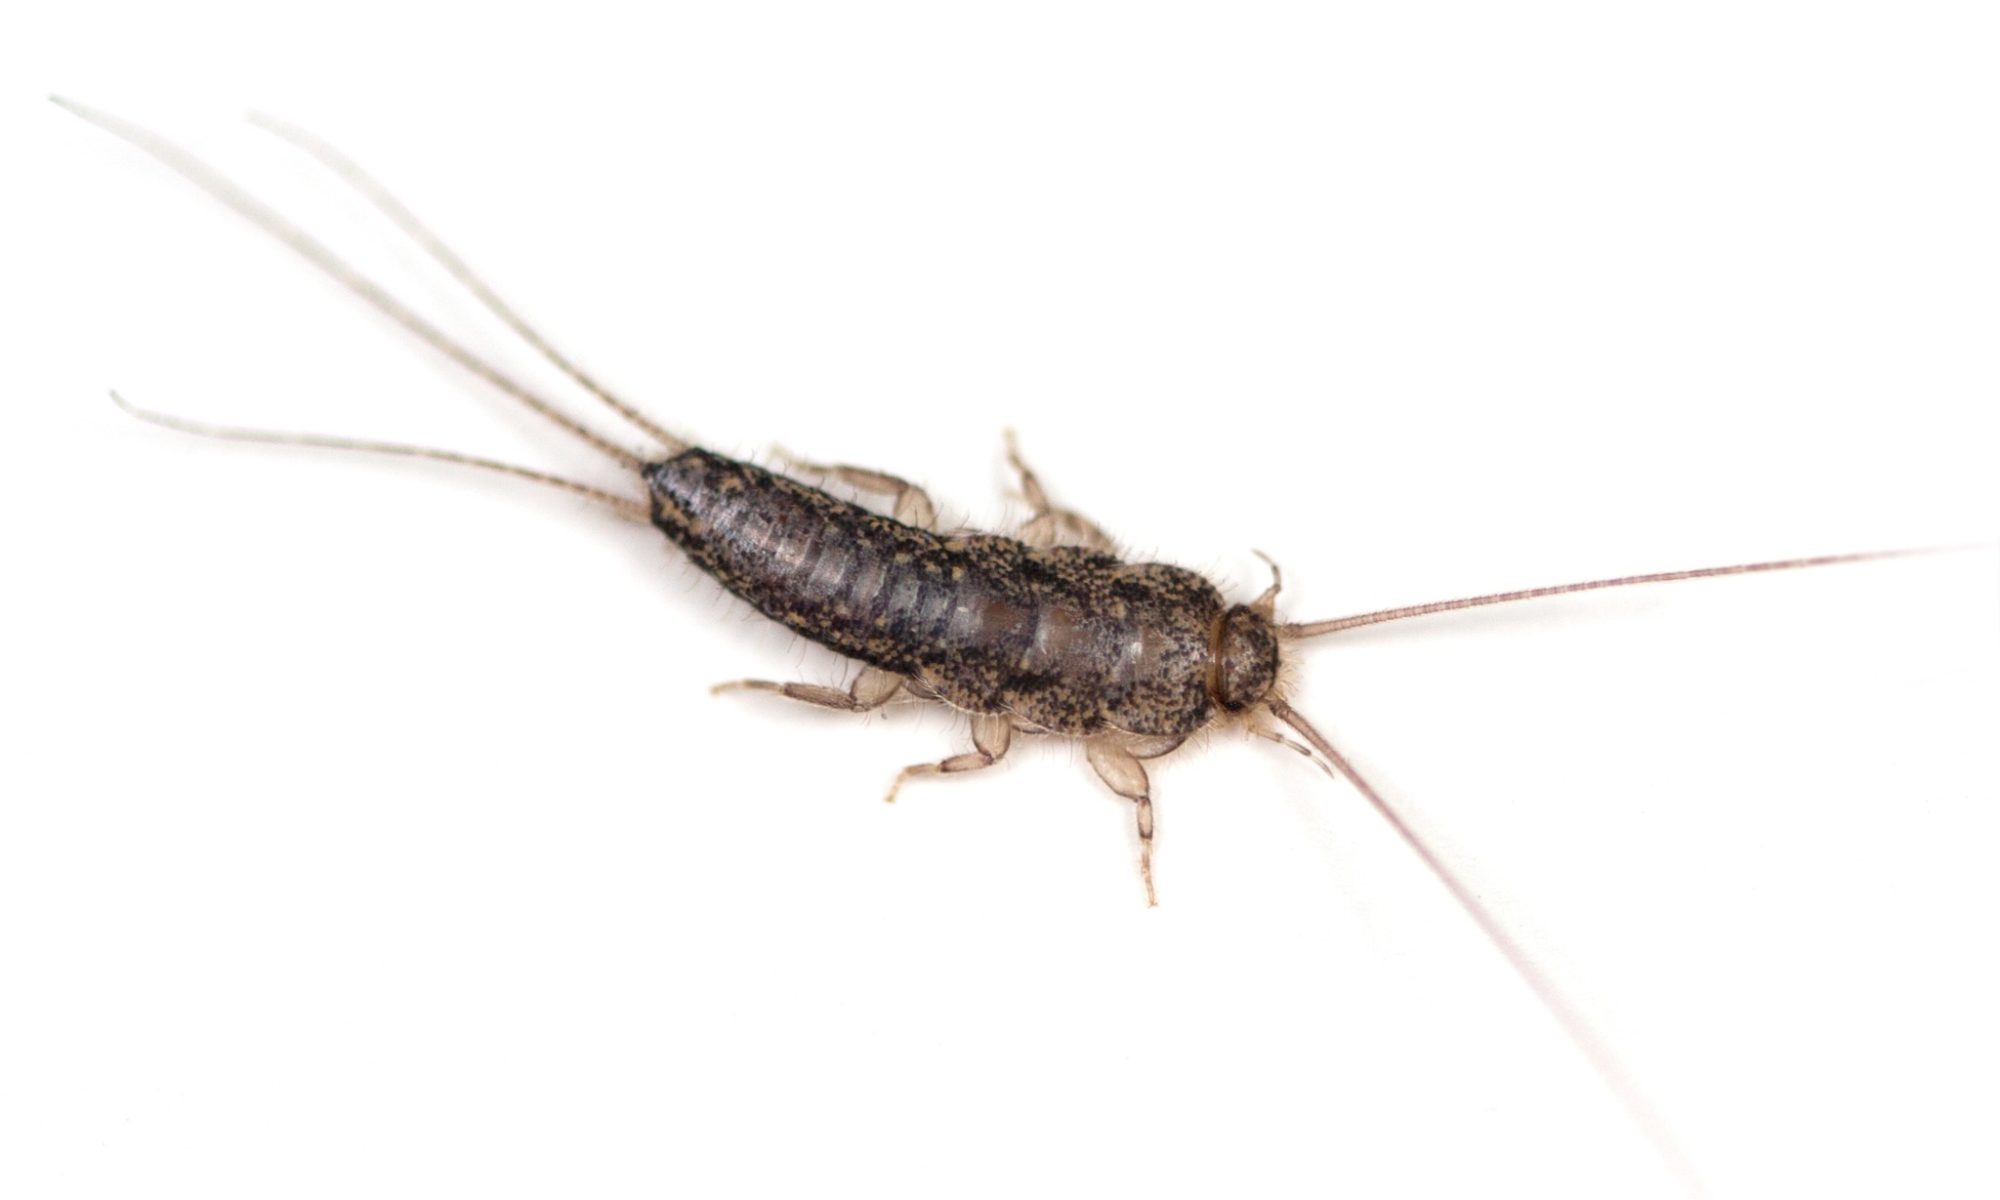 A Silverfish bug isolated on a white background